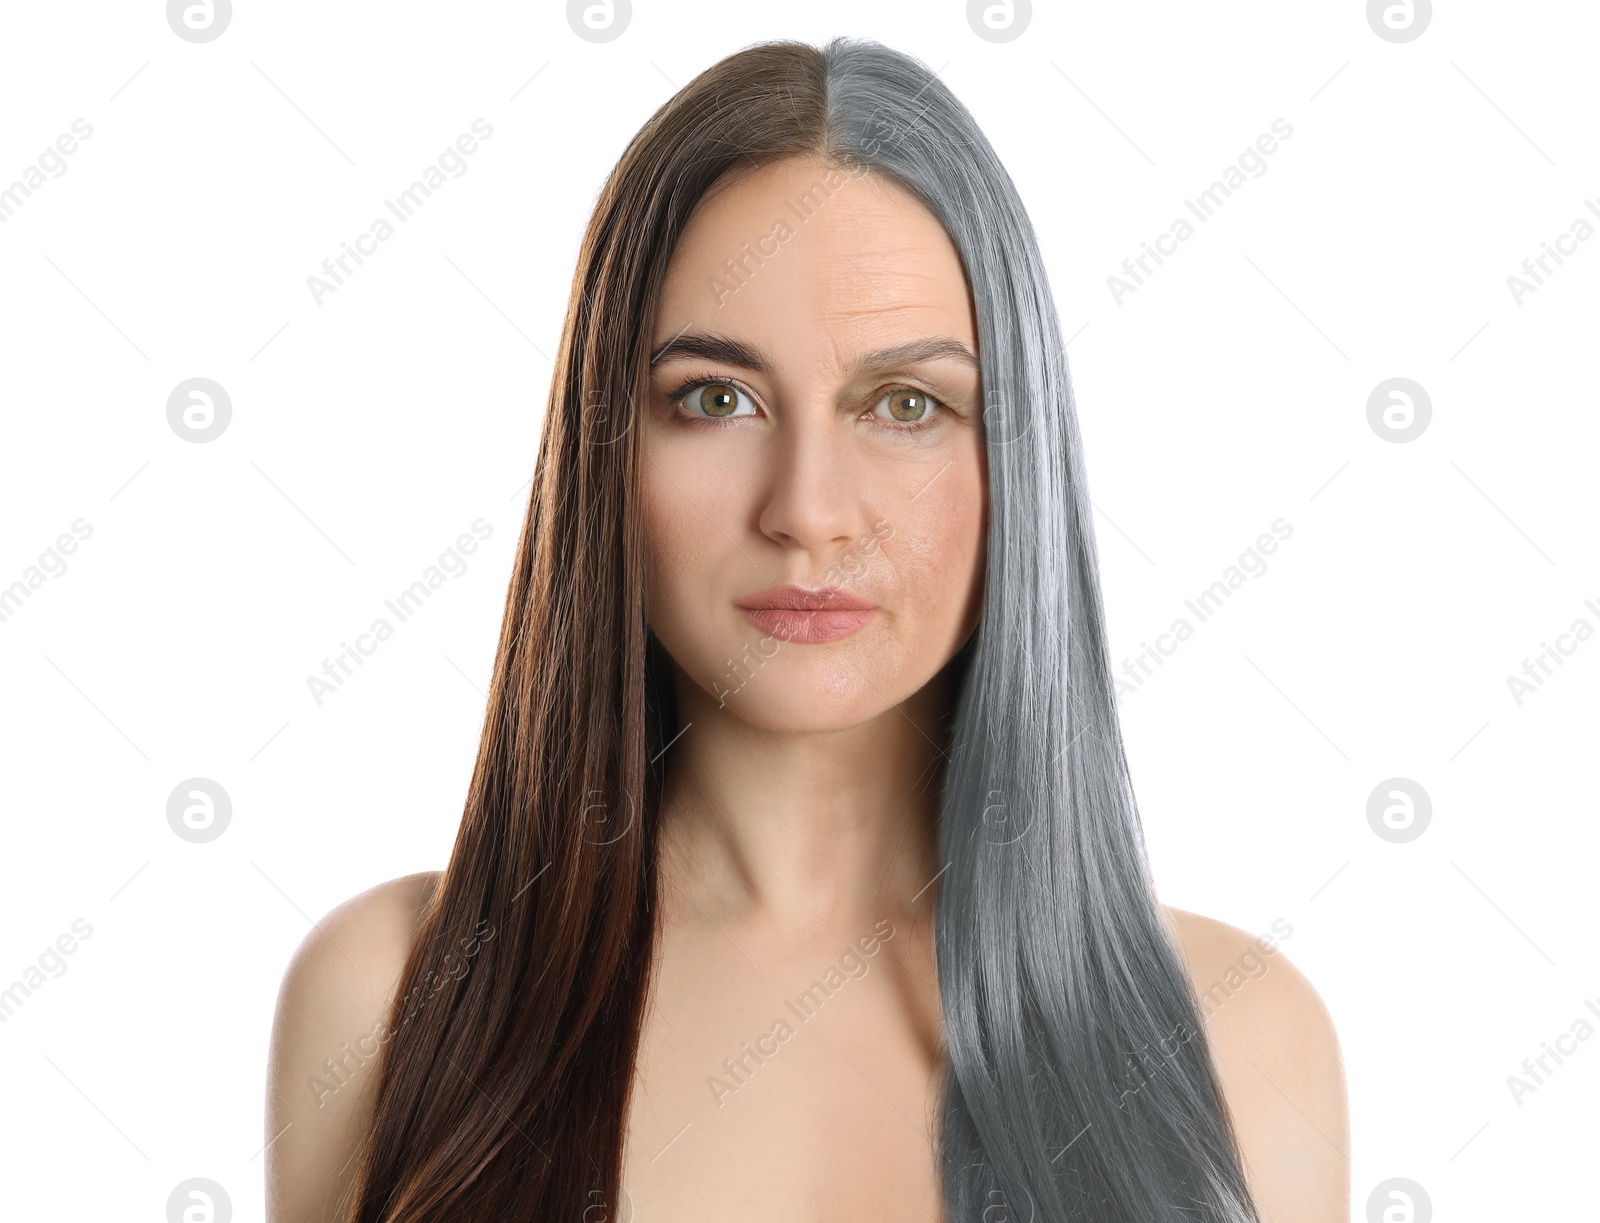 Image of Natural aging, comparison. Portrait of woman in young and old ages on white background